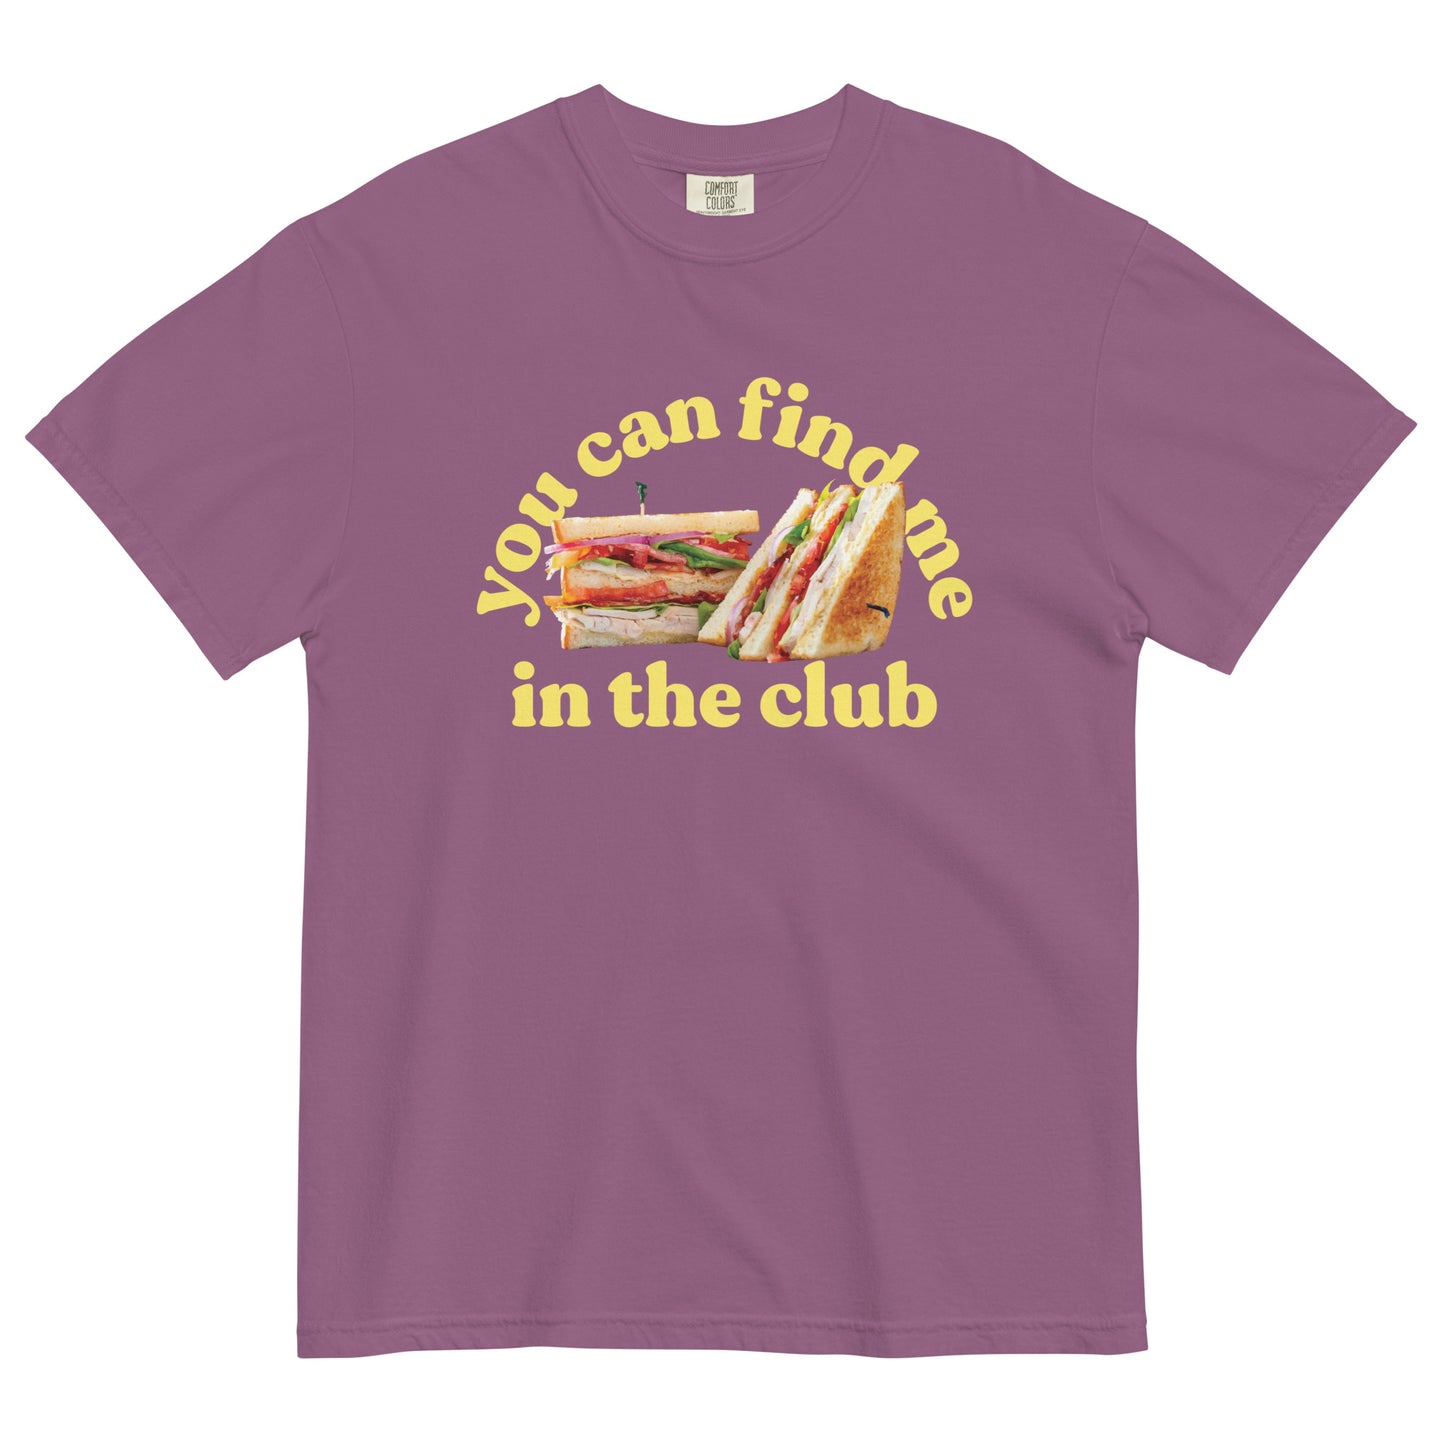 You Can Find Me In The Club Men's Relaxed Fit Tee